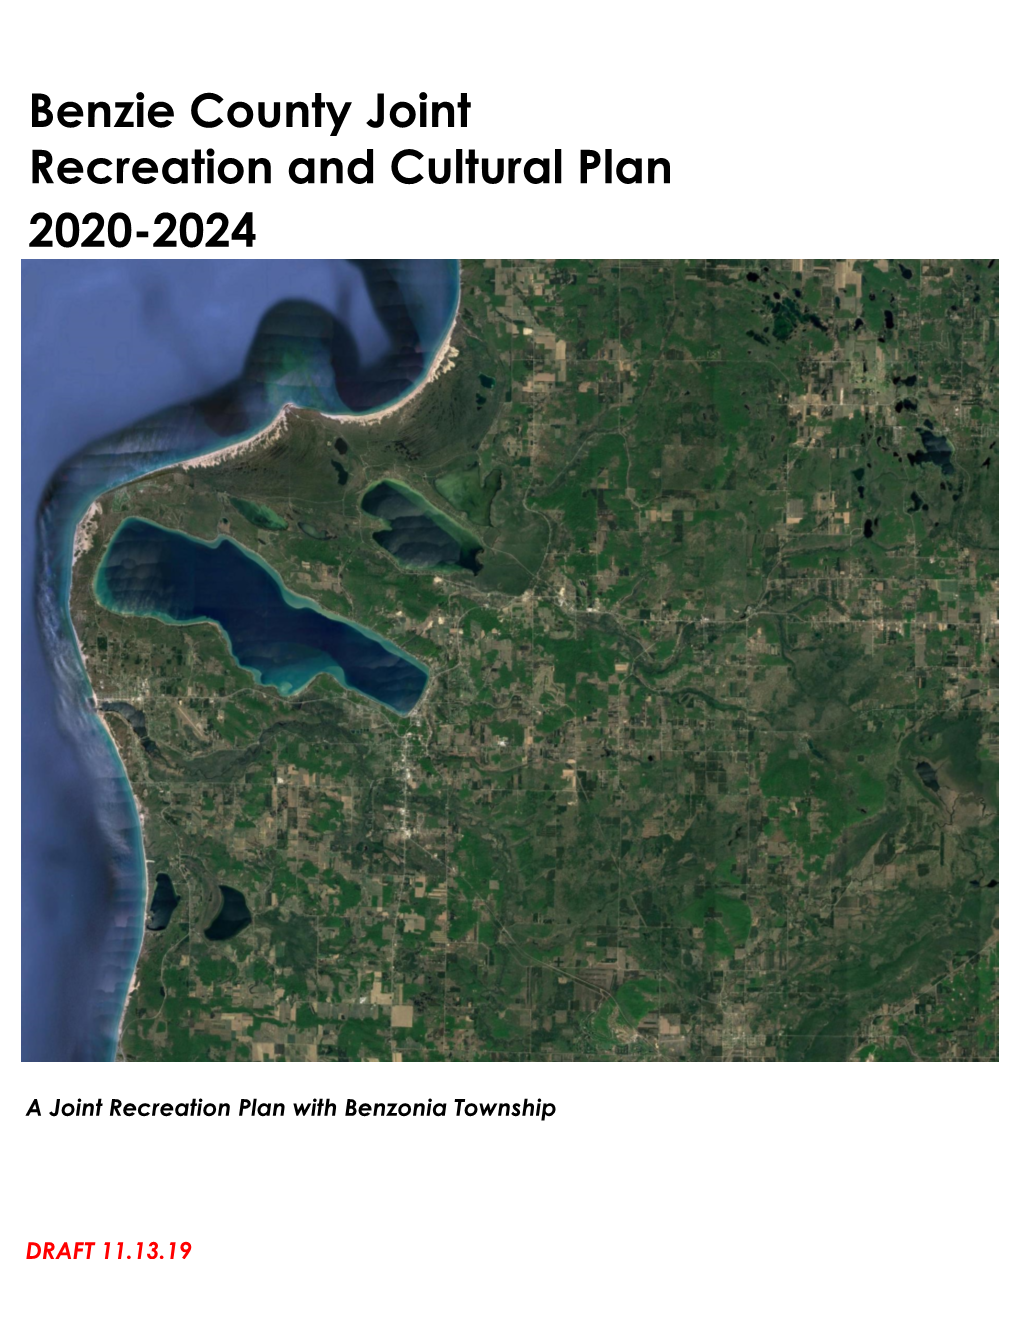 Benzie County & Benzonia Township Joint Recreation and Cultural Plan